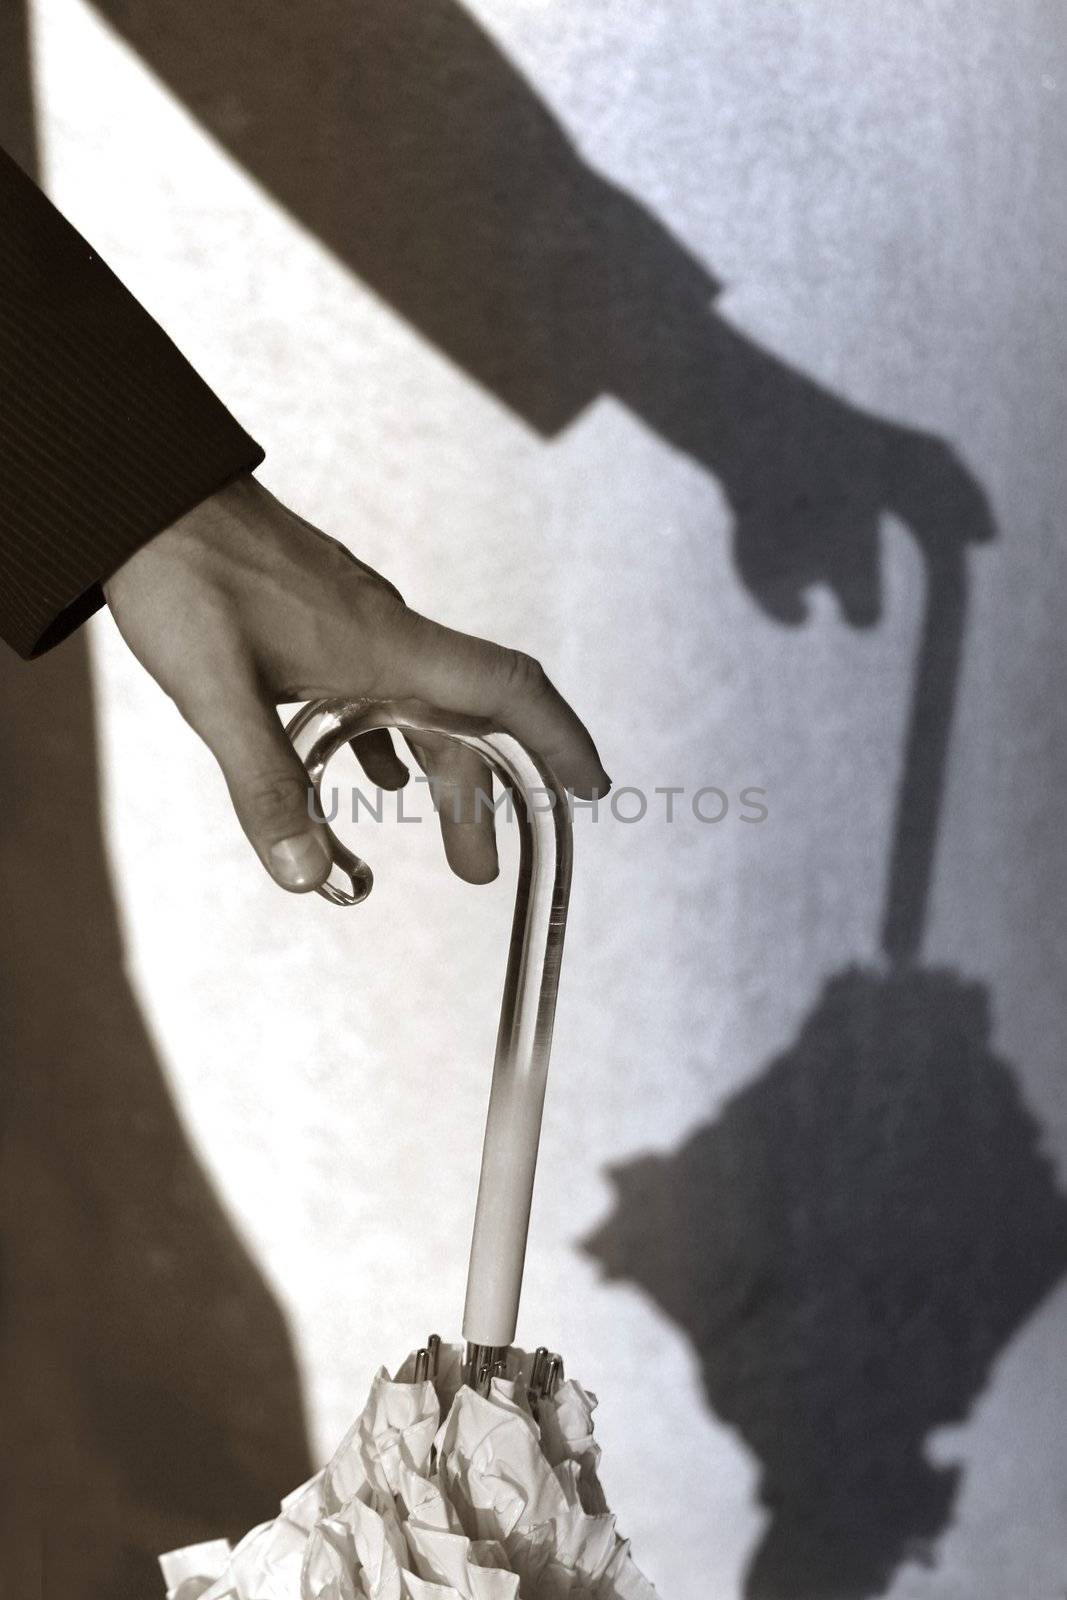 The man leans on the handle of a umbrella